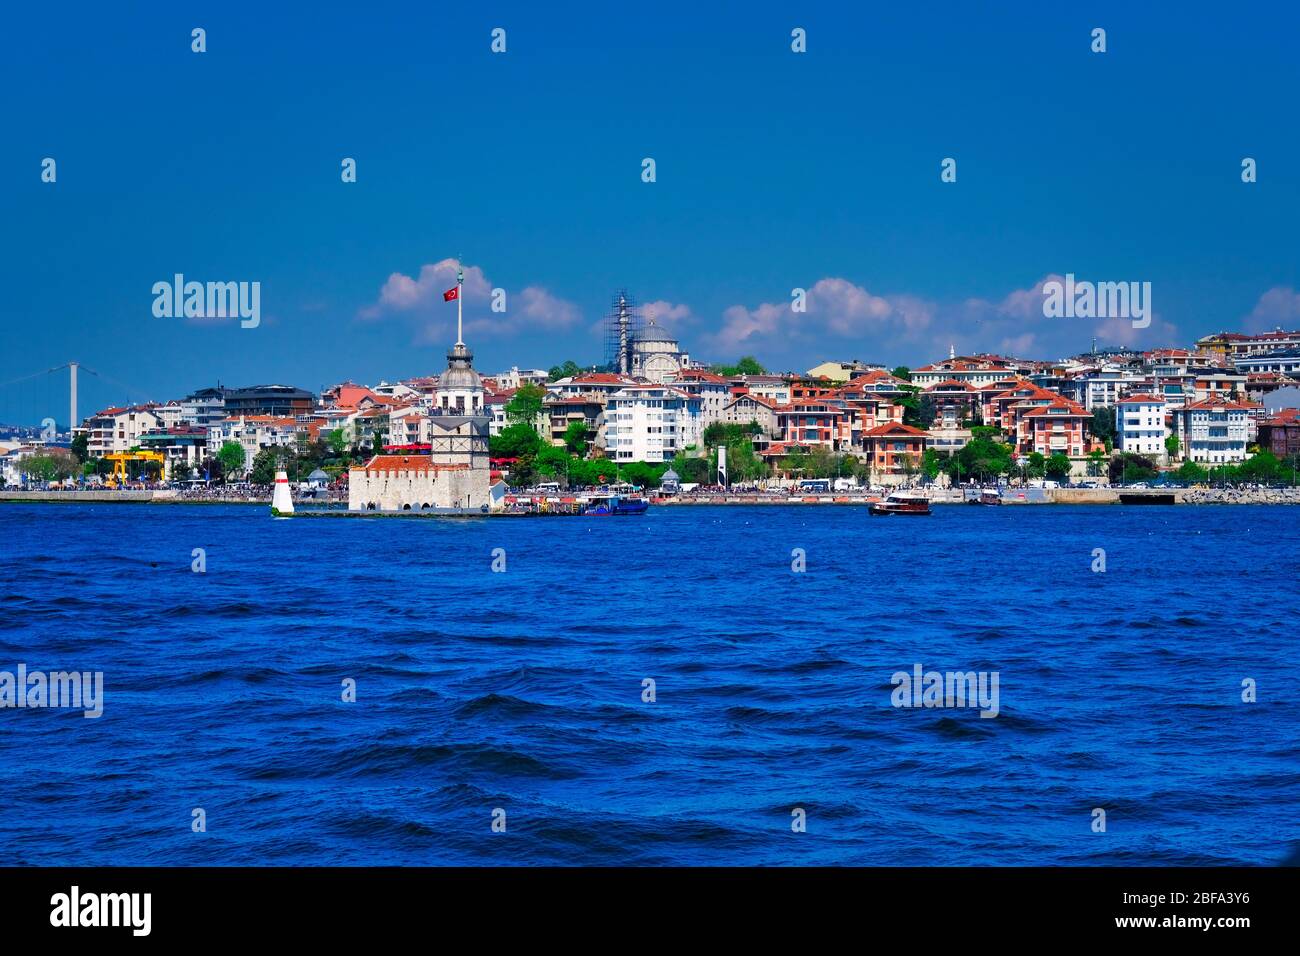 Landscape of the Maiden's Tower. The Maiden's Tower is on the waters of Uskudar and it can be considered as the cornerstone of the Bosphorus. Stock Photo